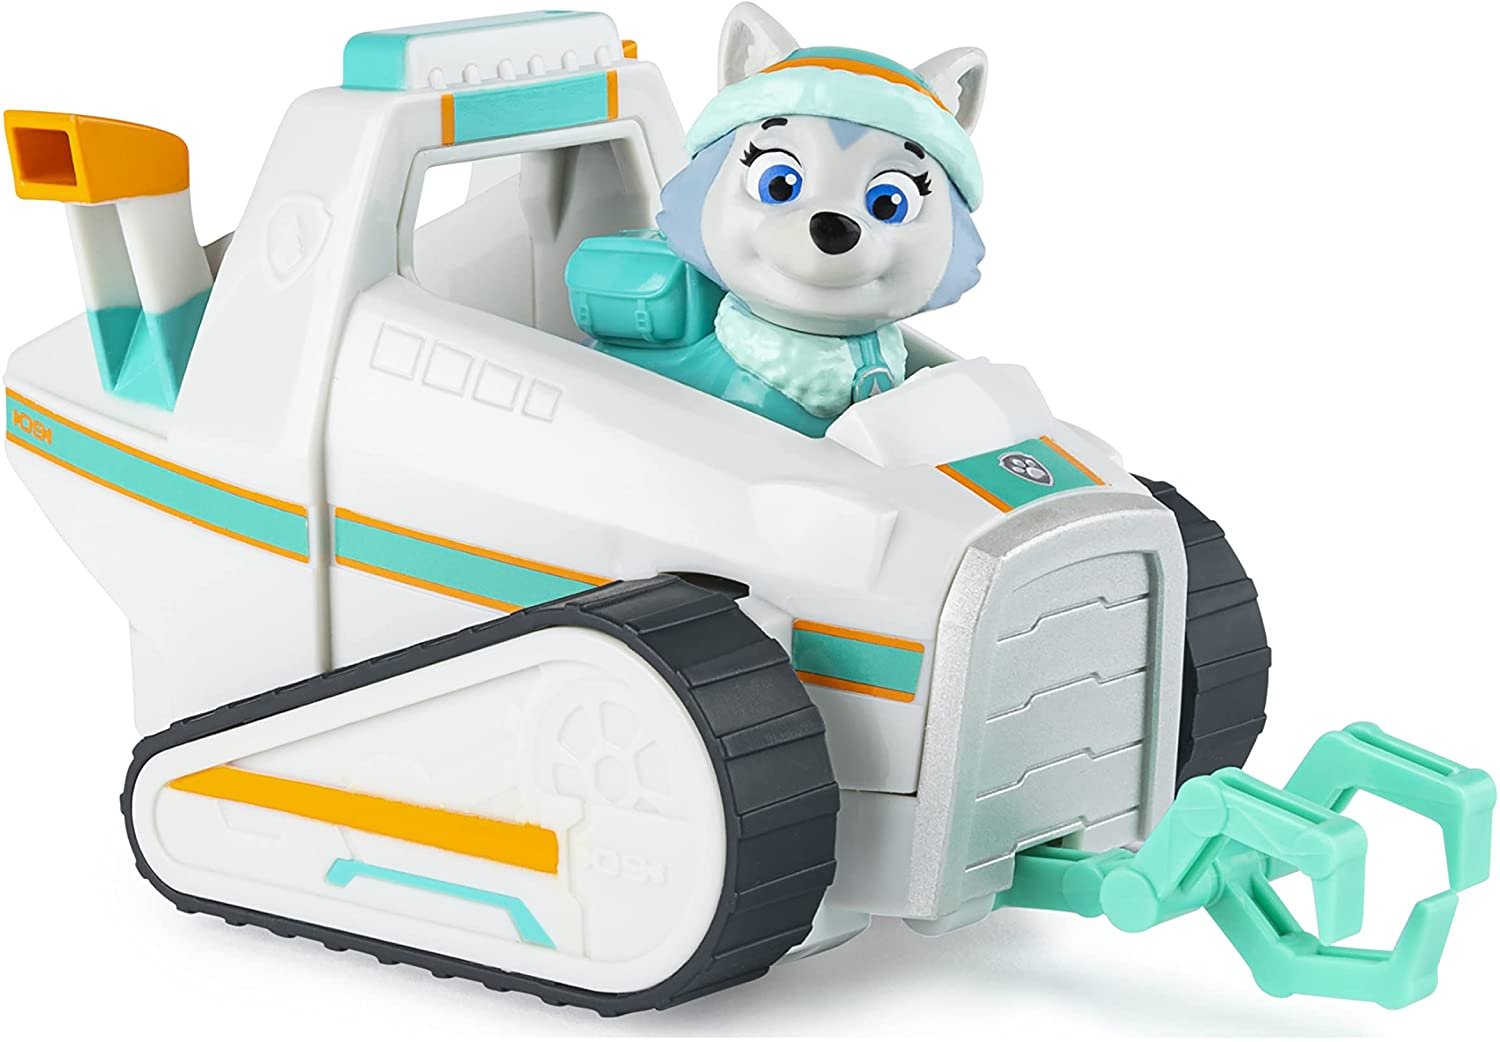 PAW Patrol, Everestâ€™s Snow Plow Vehicle with Collectible Figure, for Kids Aged 3 and Up - image 4 of 9